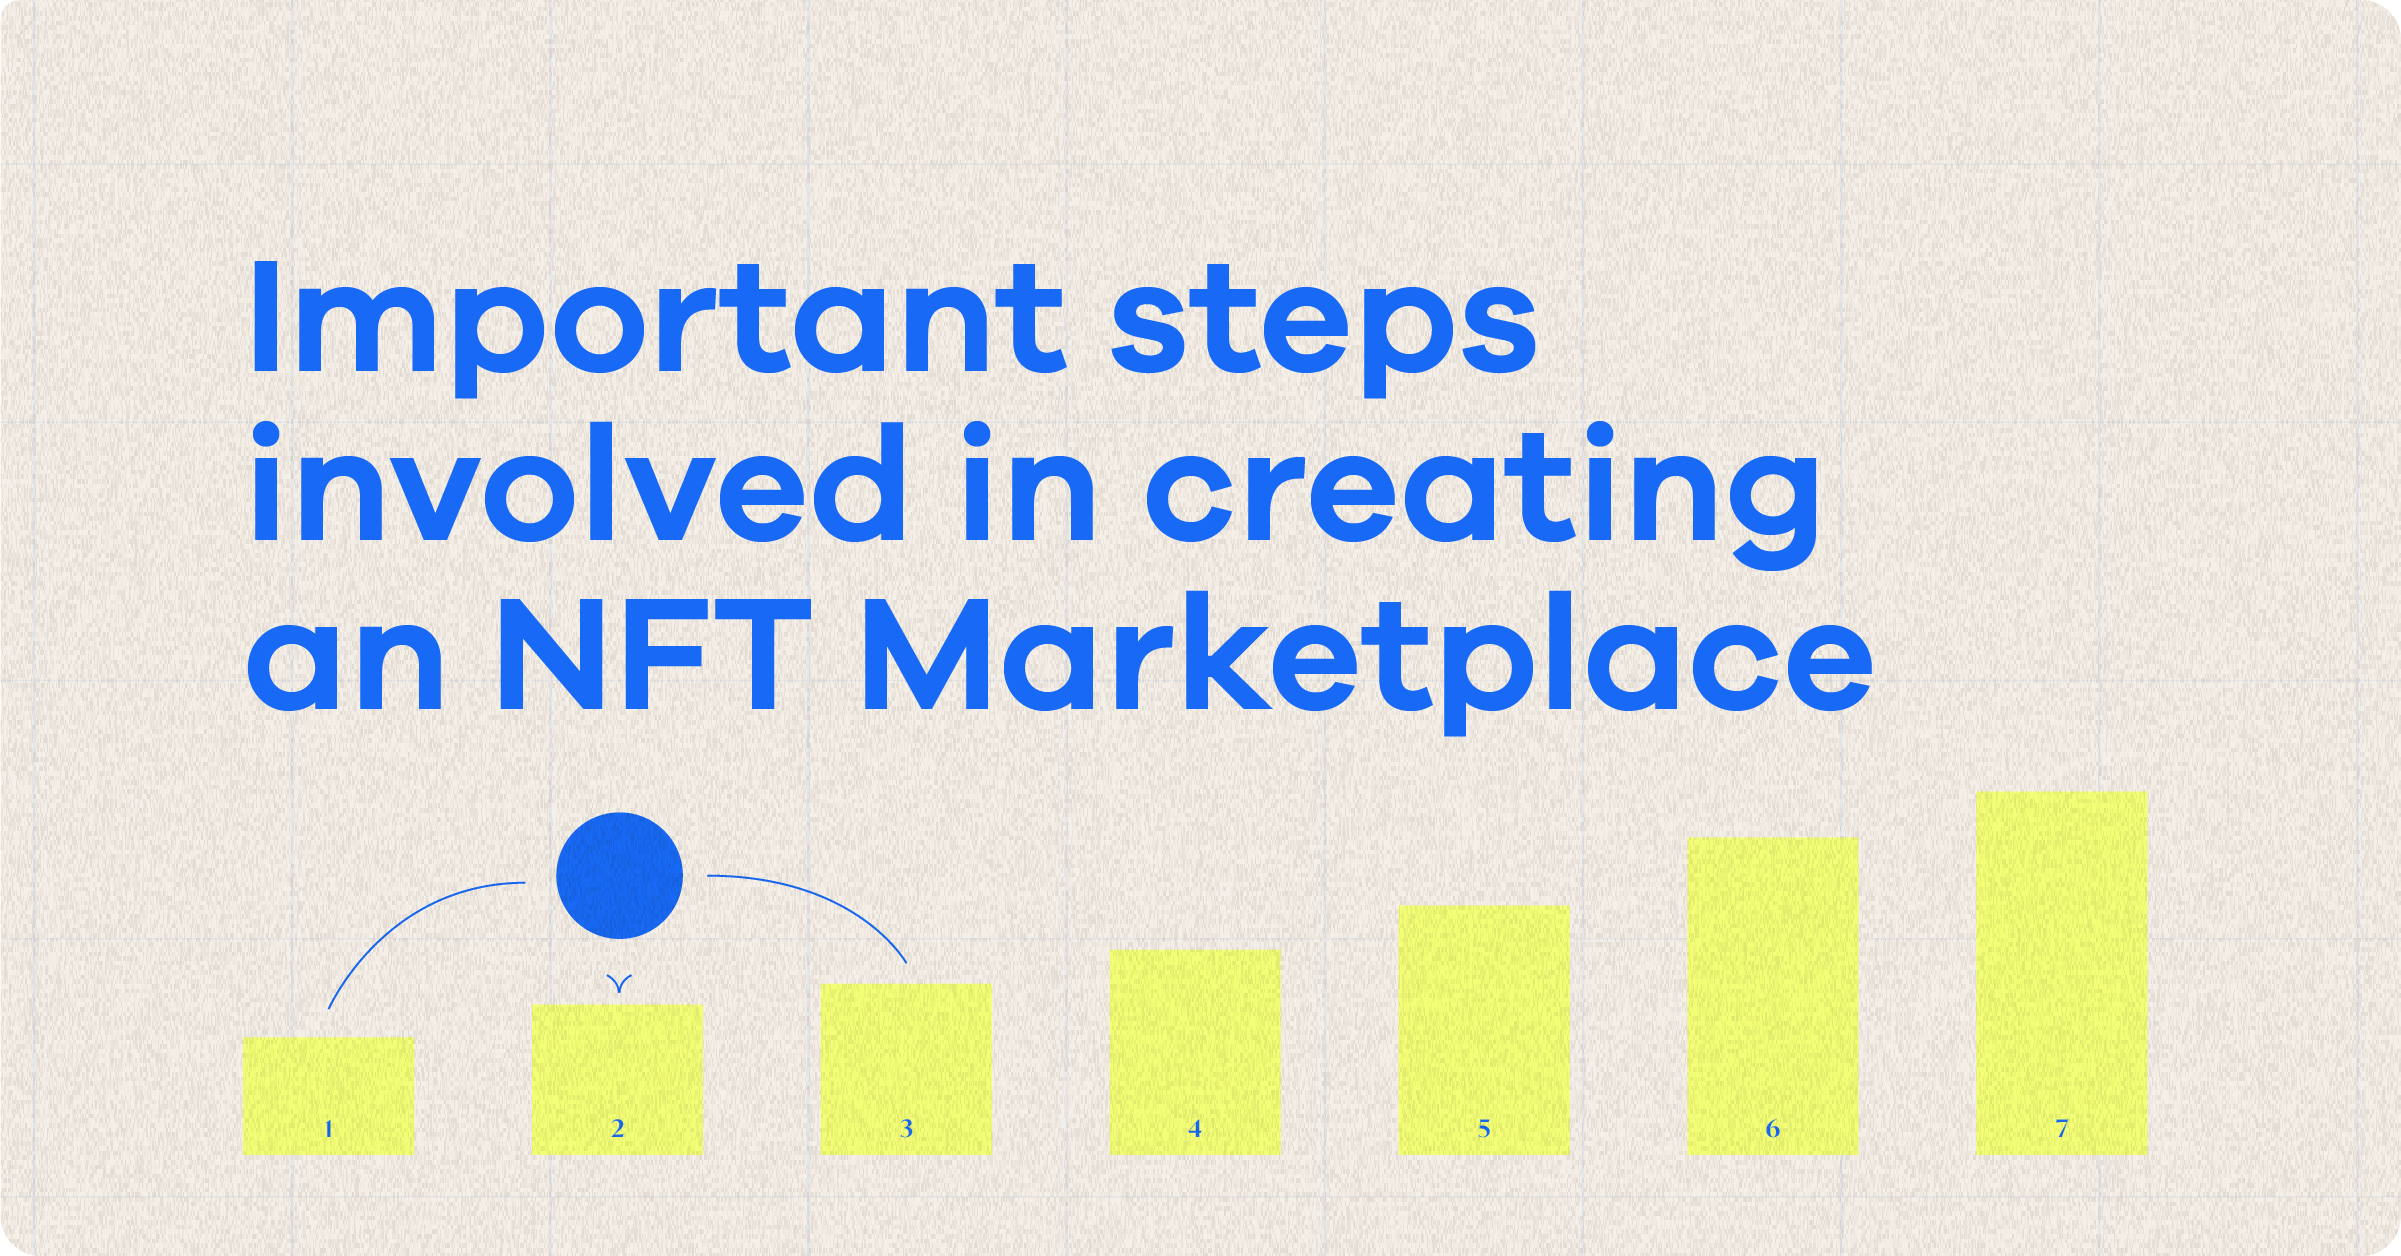 Important steps involved in creating an NFT Marketplace